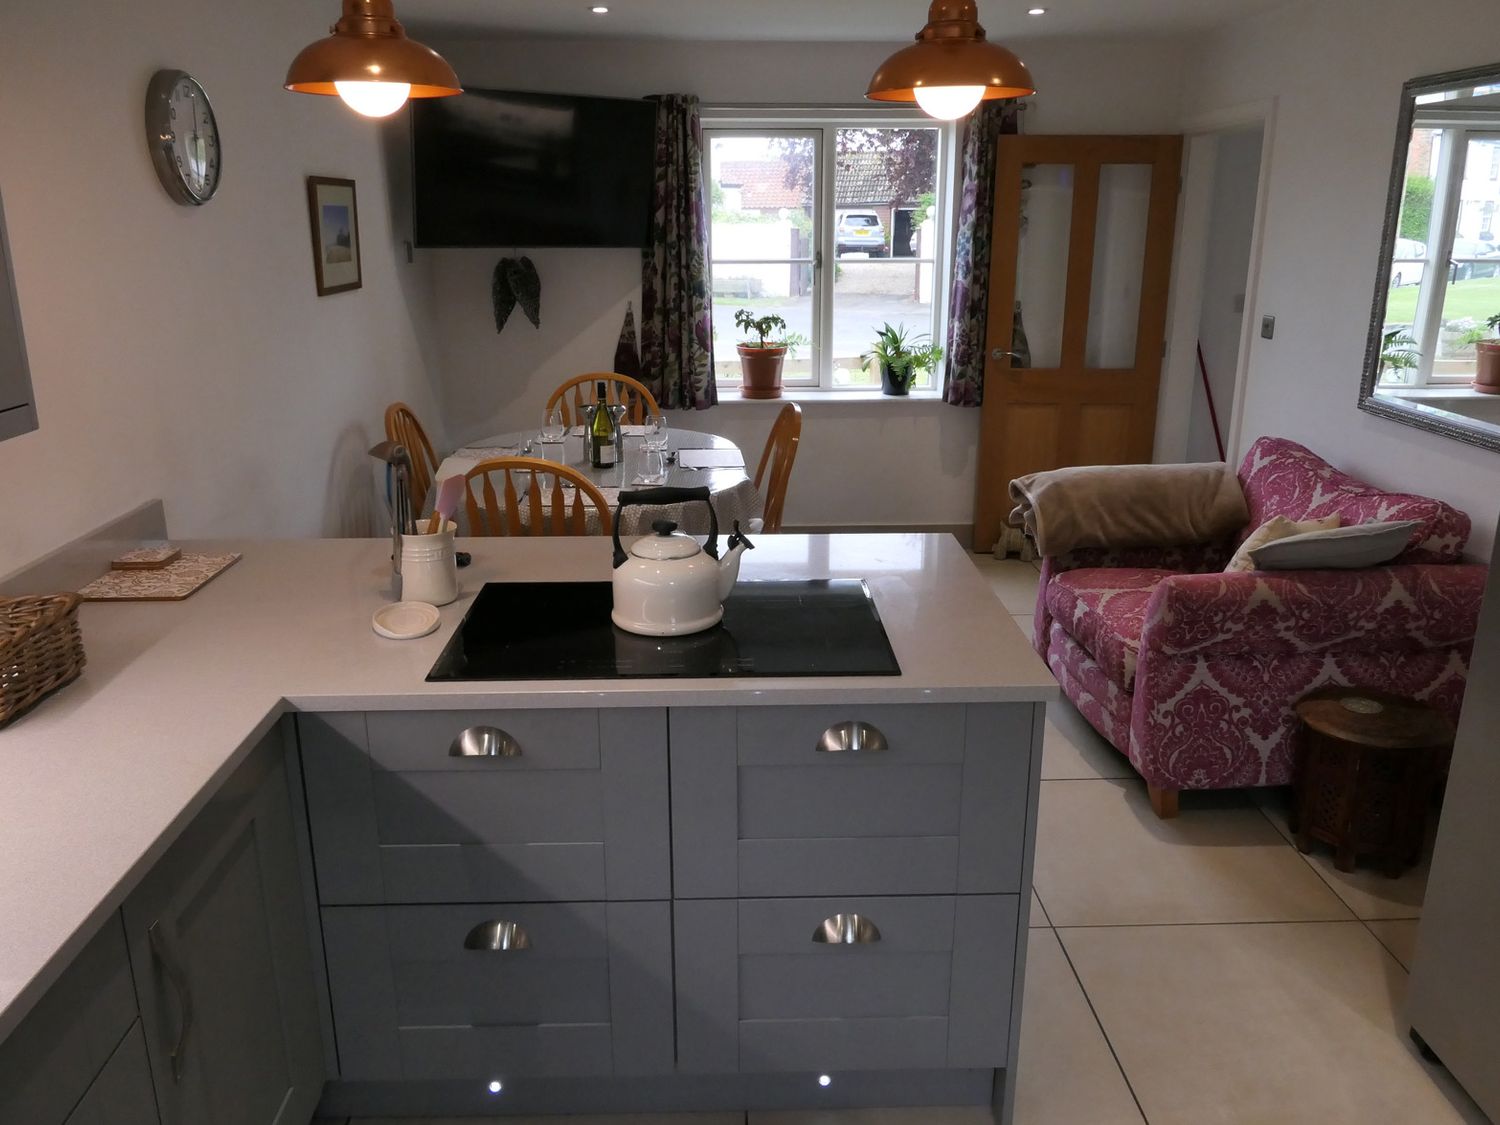 Cherry Tree Cottage, Atwick near Hornsea, East Riding of Yorkshire. Near a National Park. WiFi. Dogs